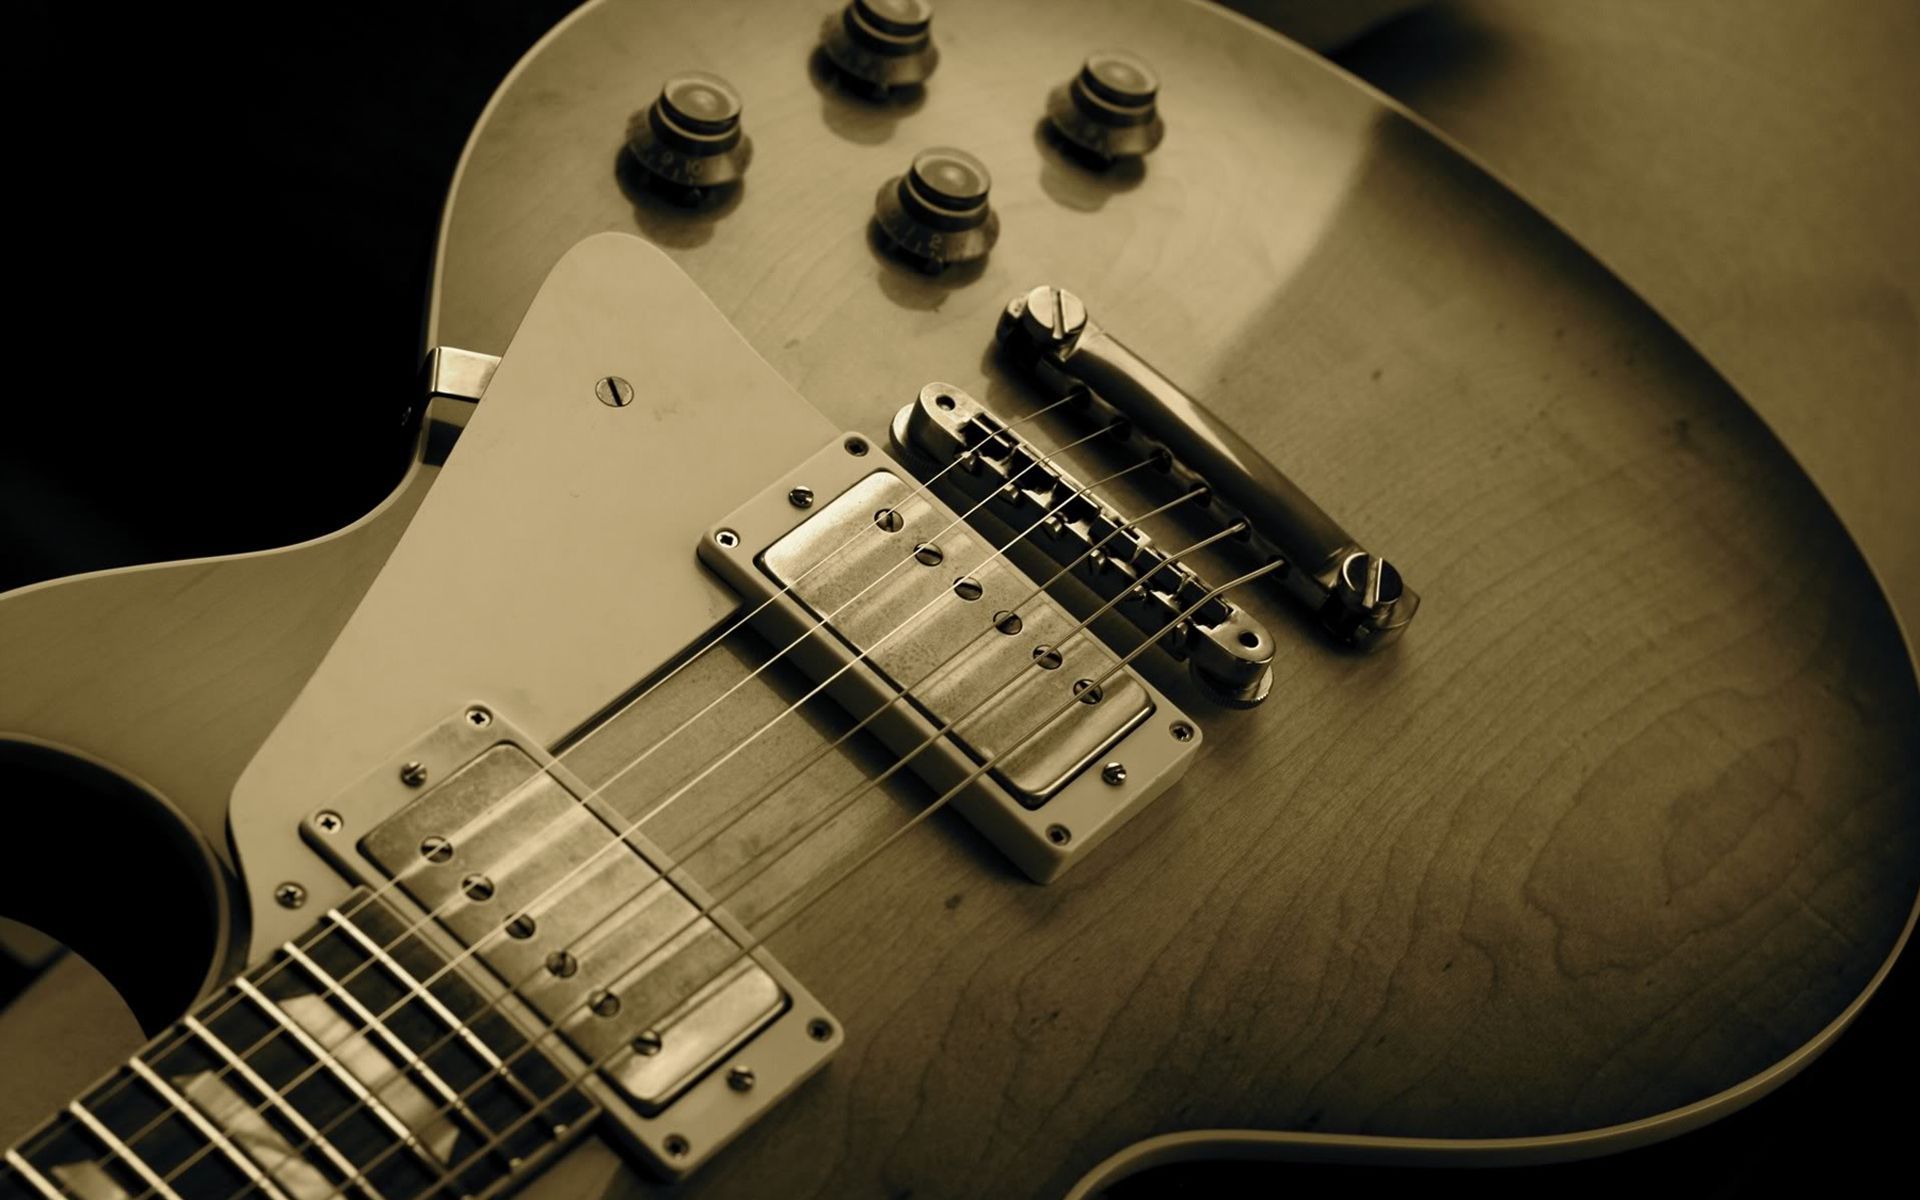 Guitar HD Wallpaper, Guitar Images Free, New Backgrounds